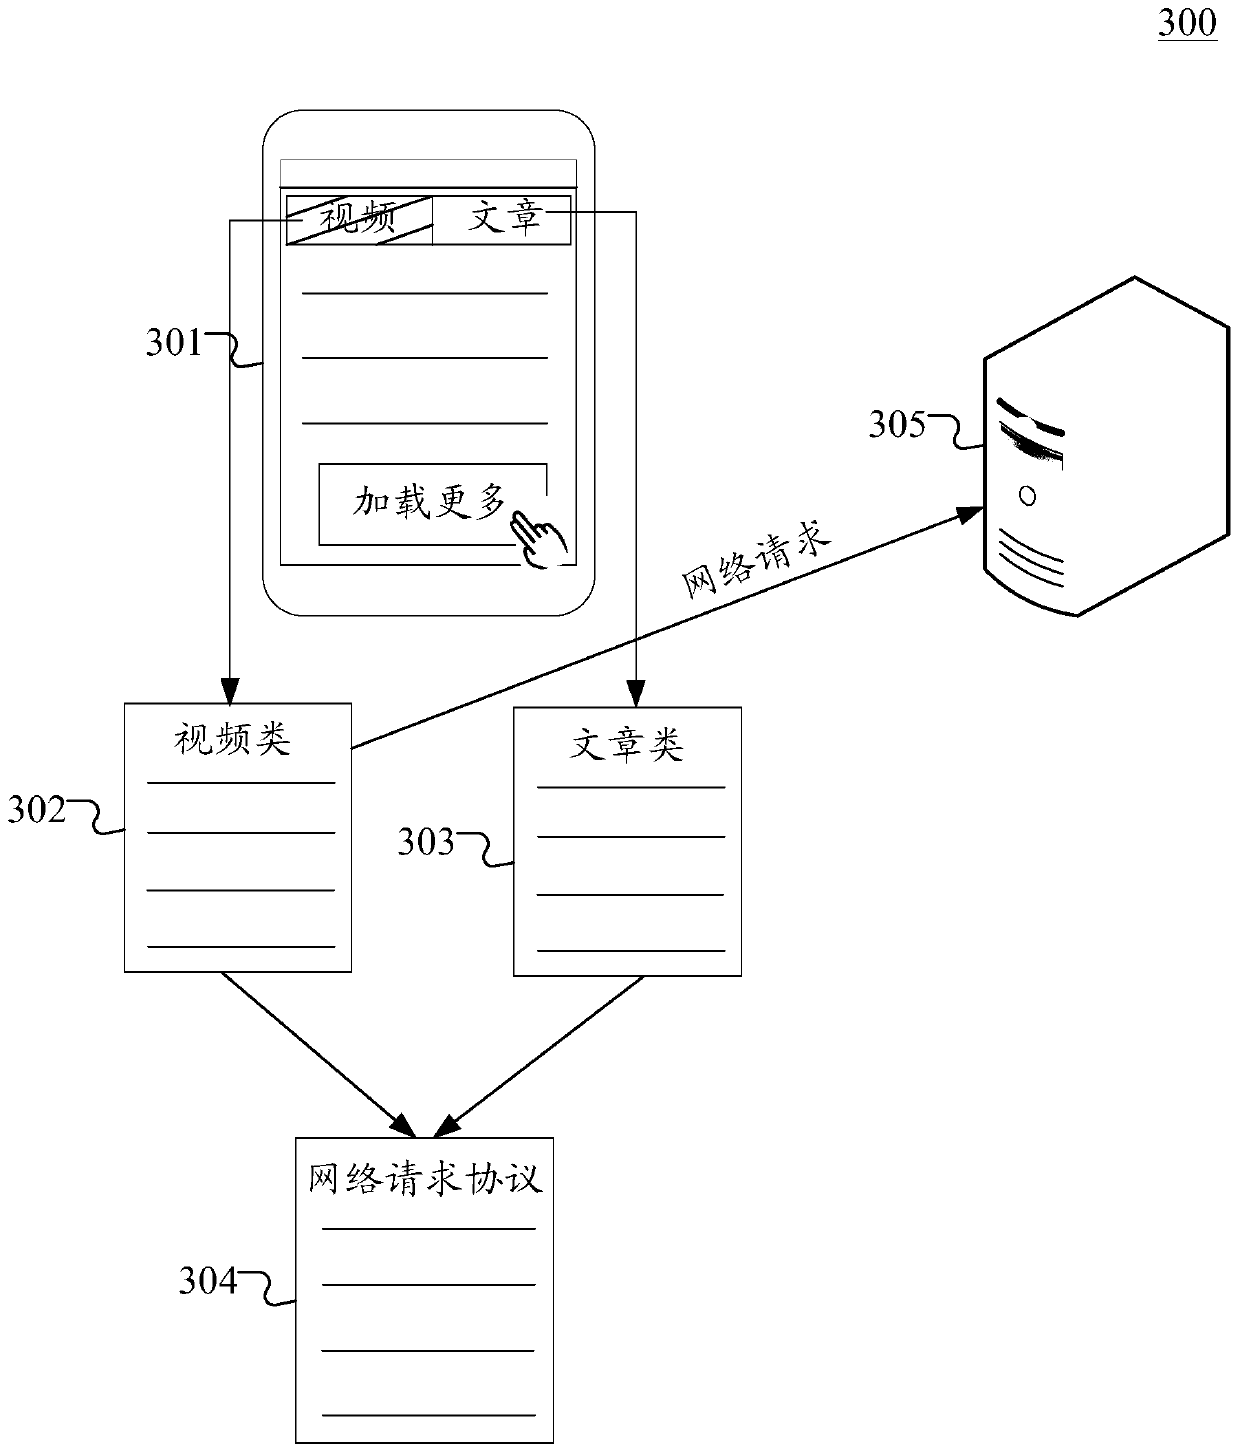 Method and device for sending network request